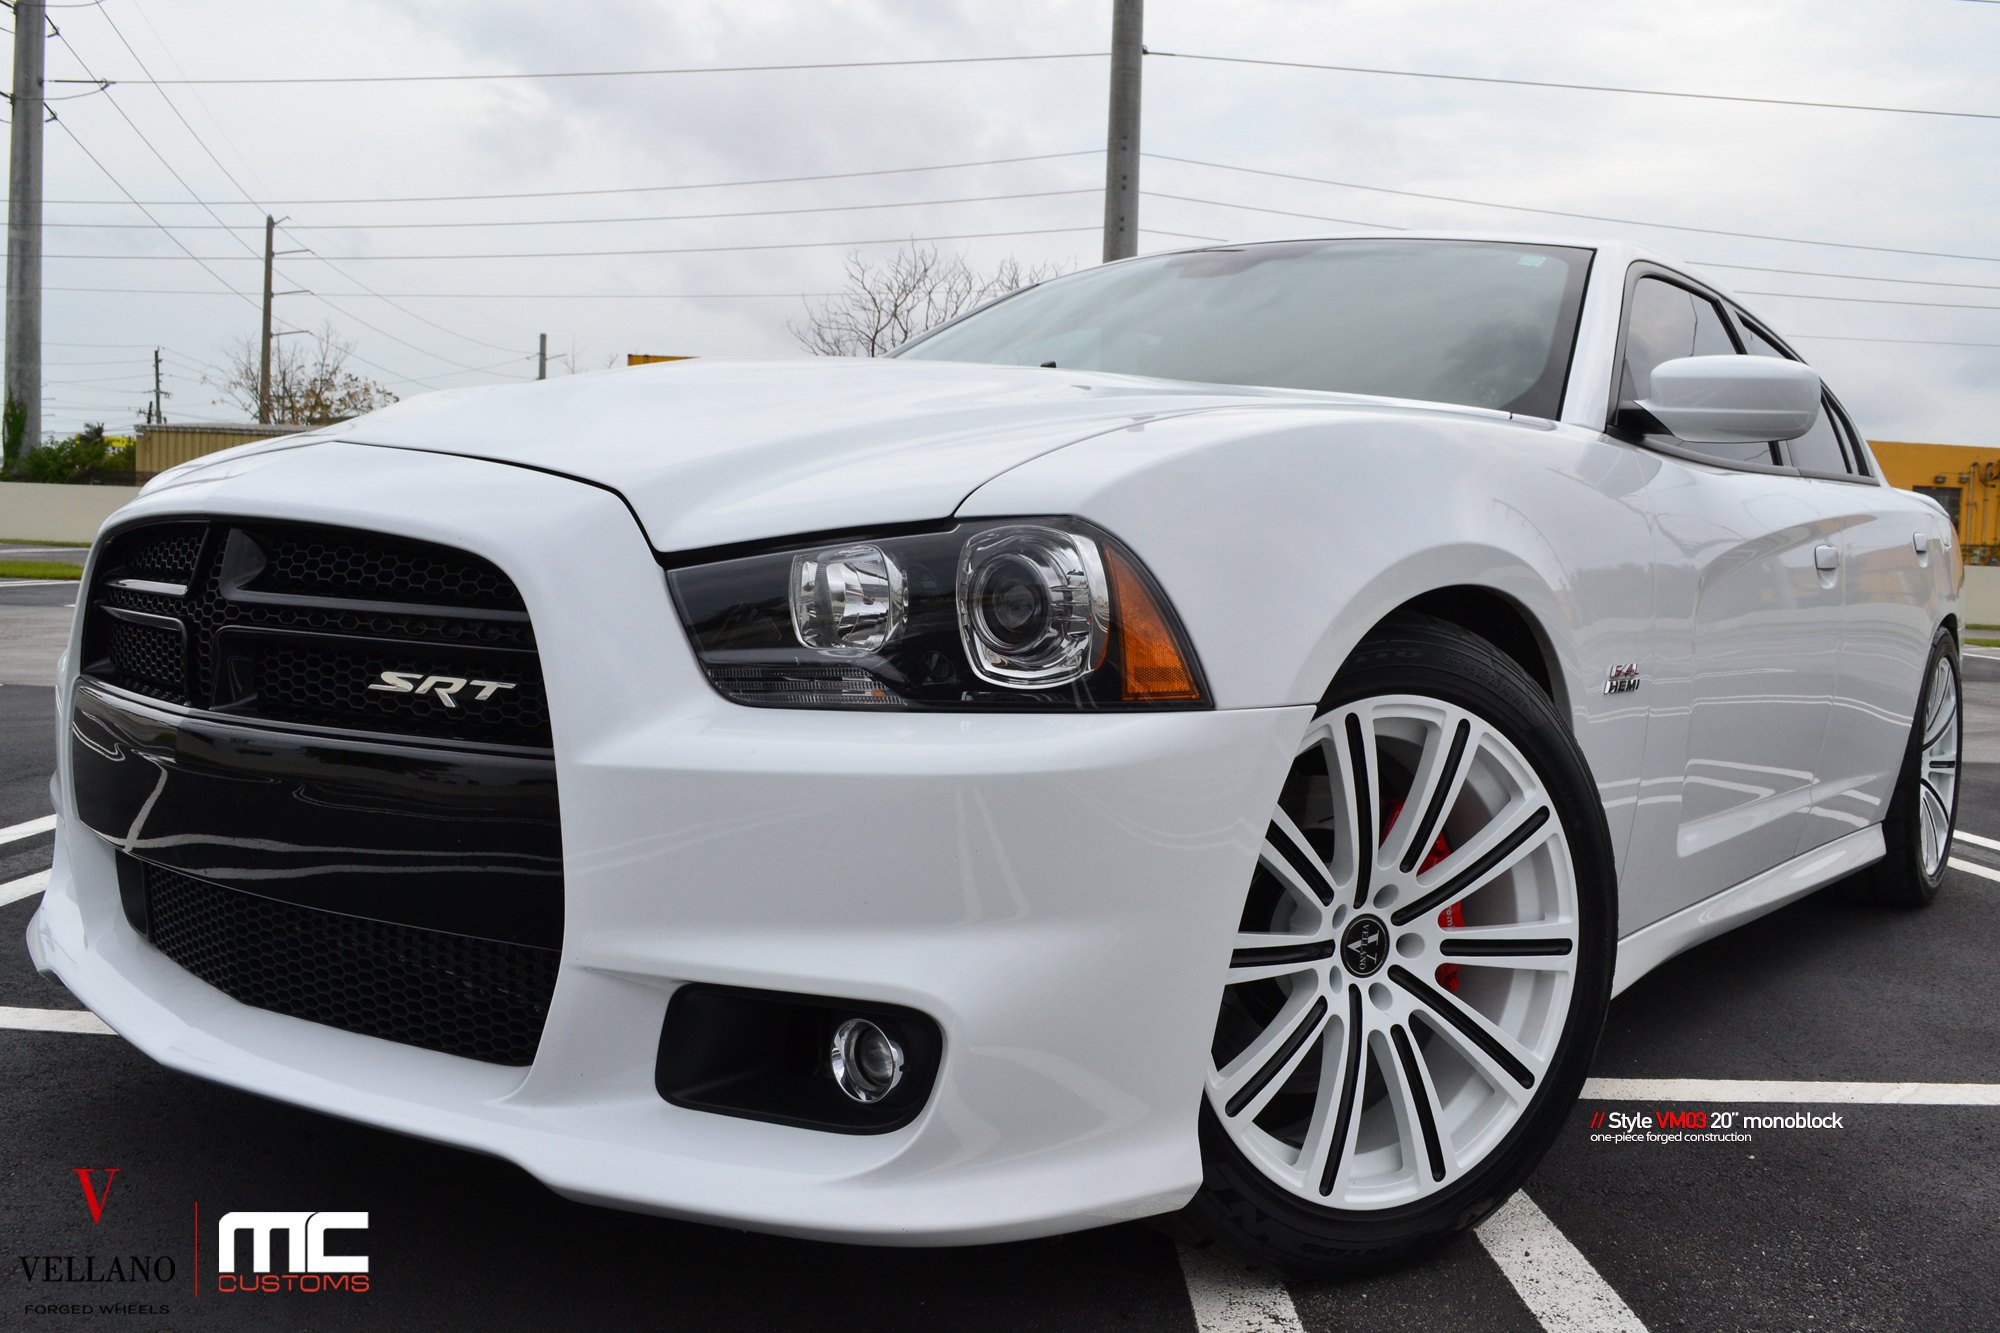 Blacked Out Grille on White Dodge Charger SRT - Photo by Vellano